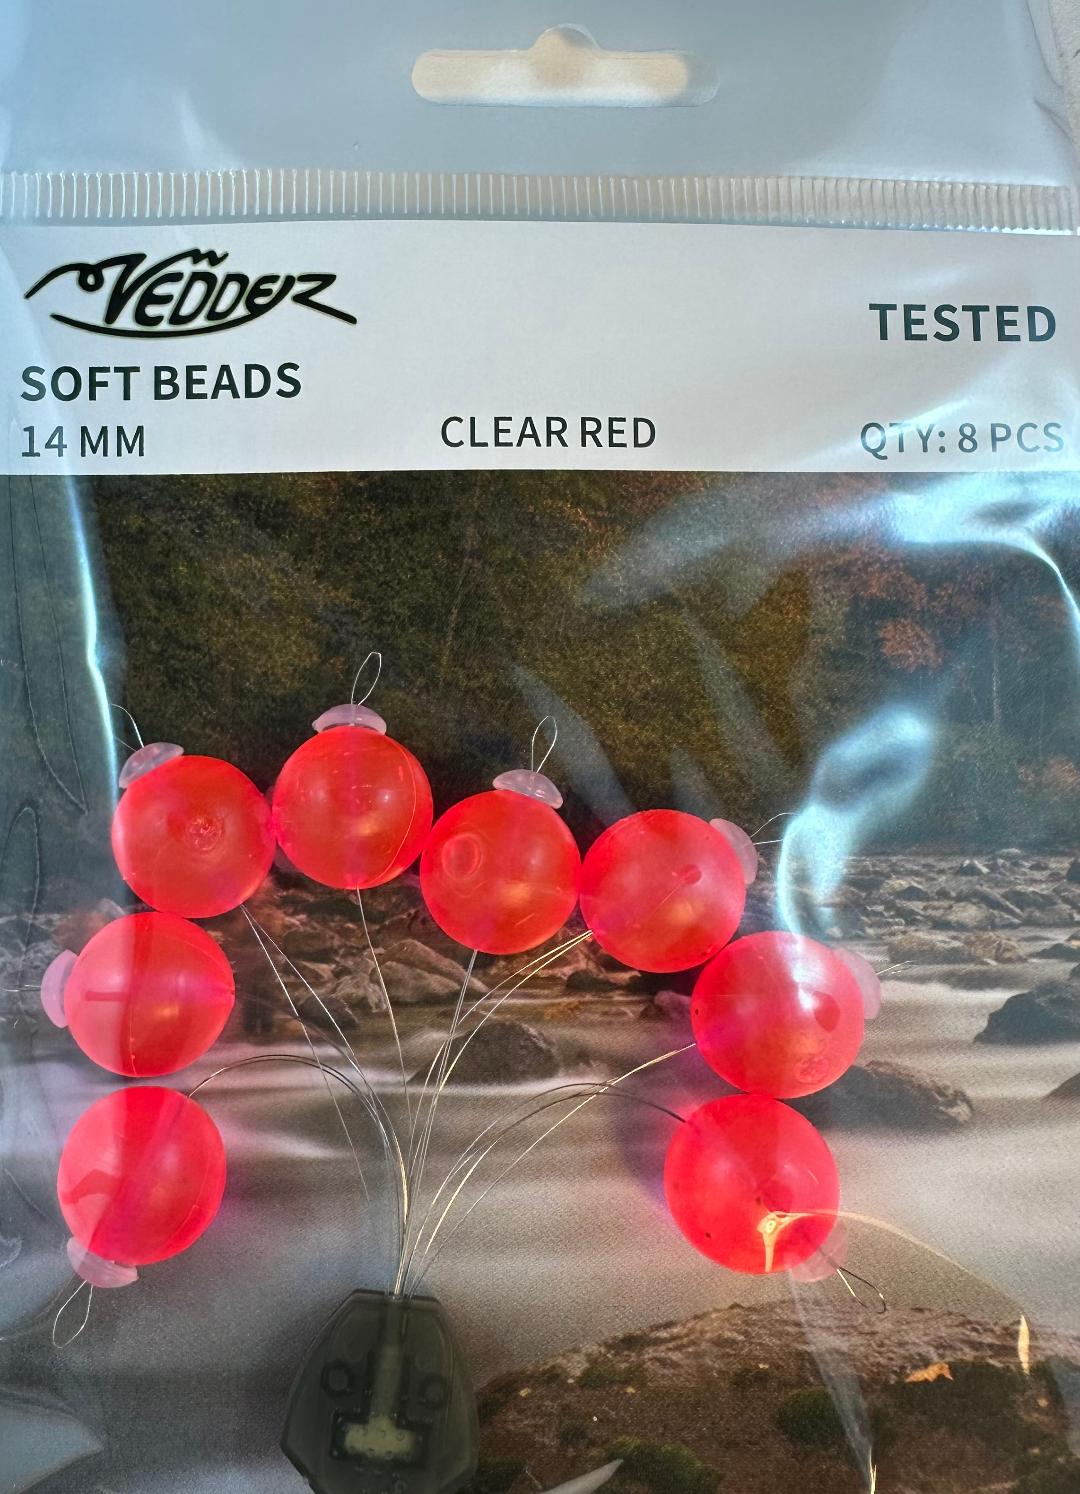 VSB-CR 14 Vedder 14 mm Clear Red Soft Beads x 8 with Stoppers x 8